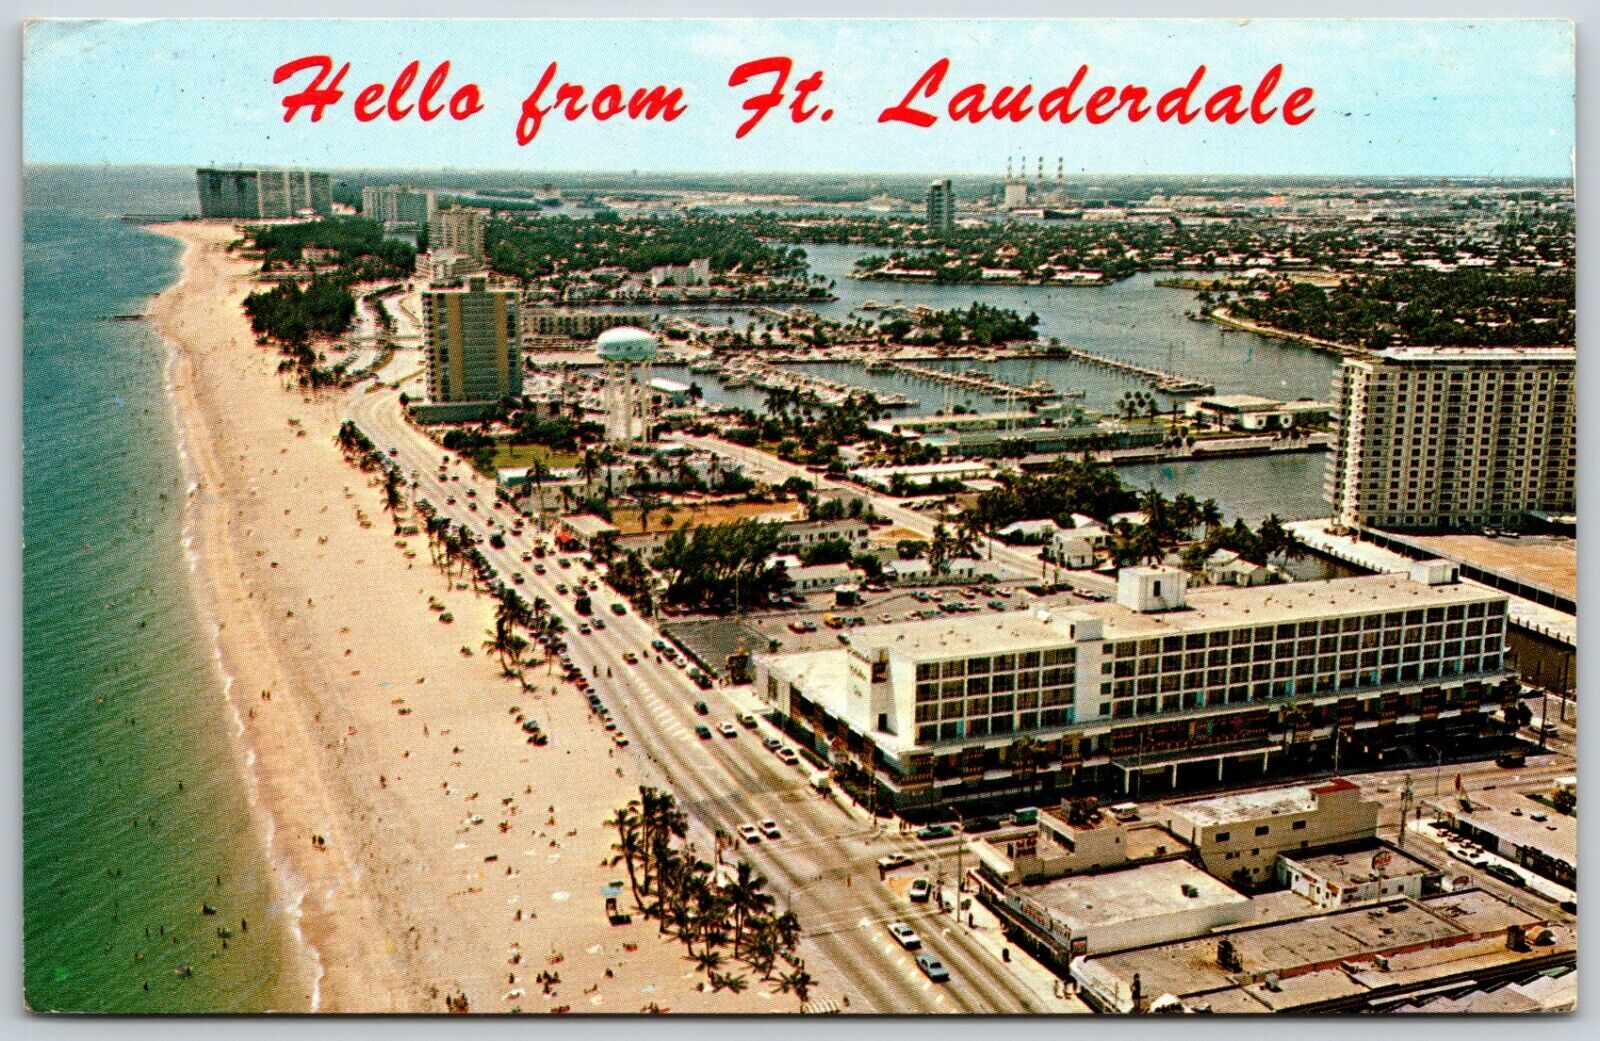 Hello from Ft. Lauderdale, Aerial View, Florida - Postcard